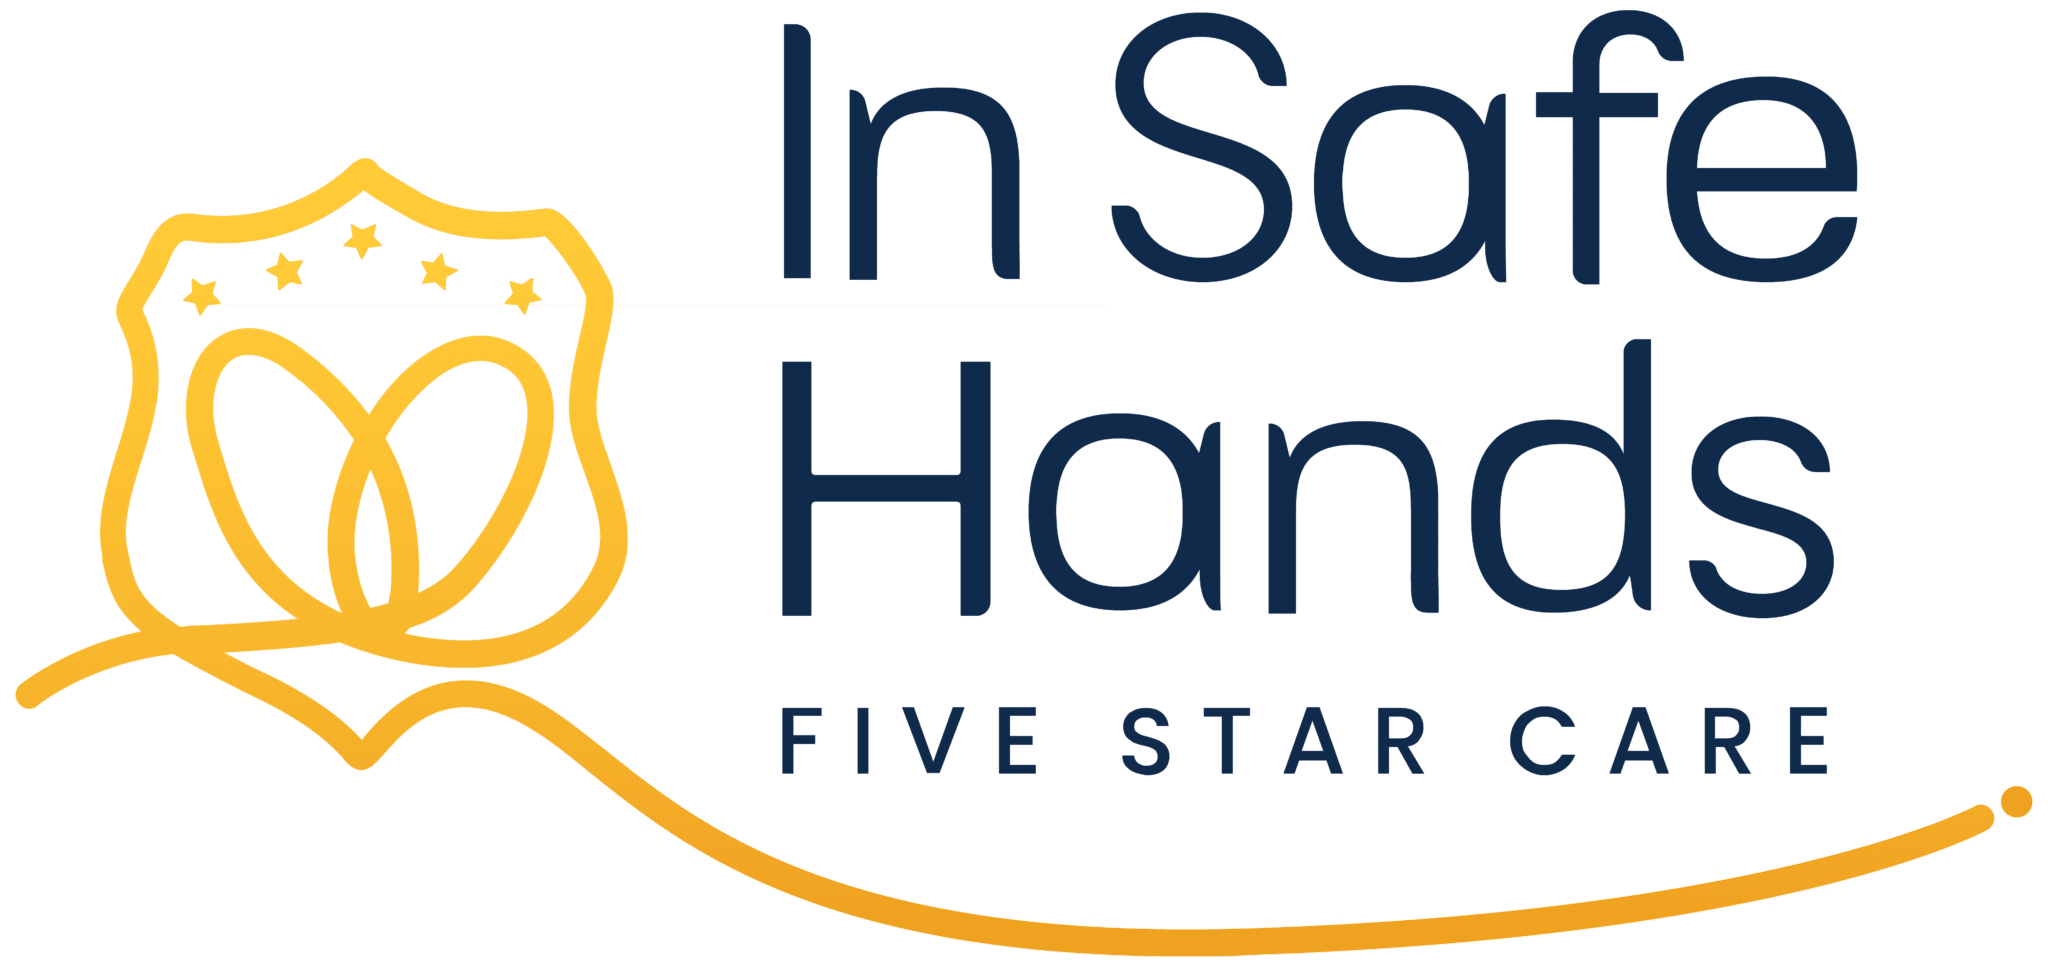 A logo displaying a yellow shield with stars and a heart design next to the text "In Safe Hands" and "Five Star Care" in blue.